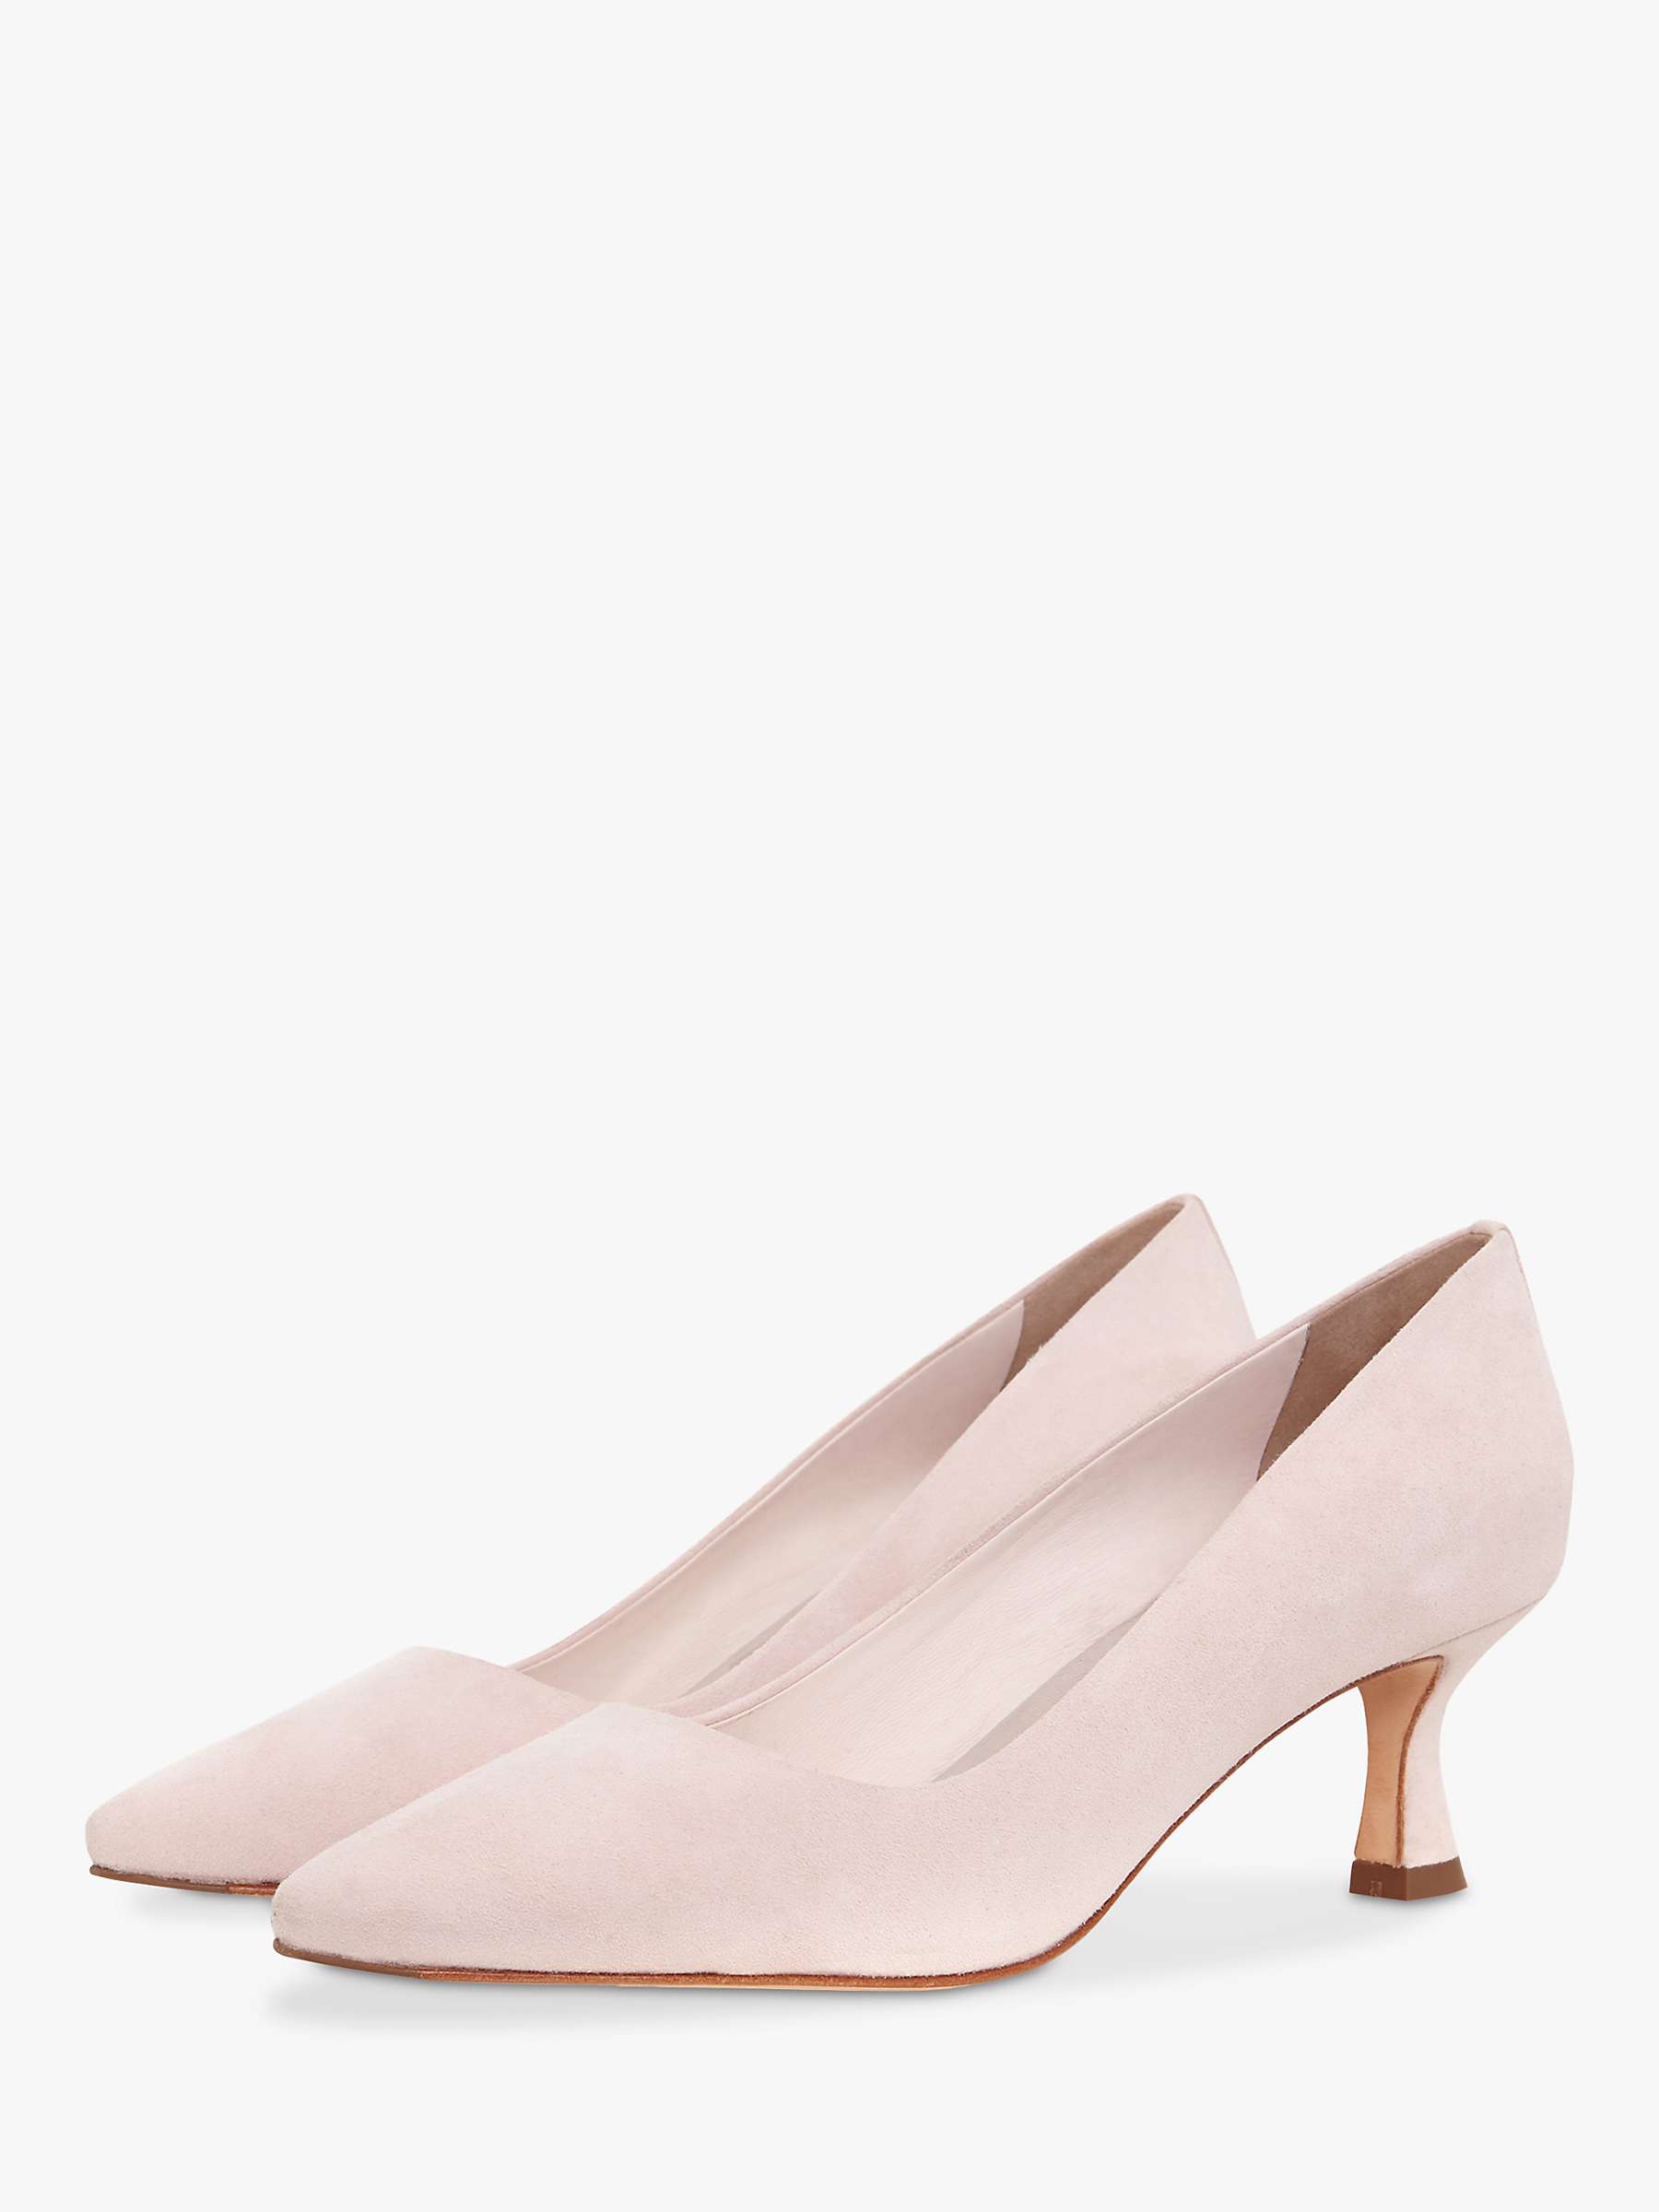 Buy Hobbs Esther Suede Court Shoes Online at johnlewis.com